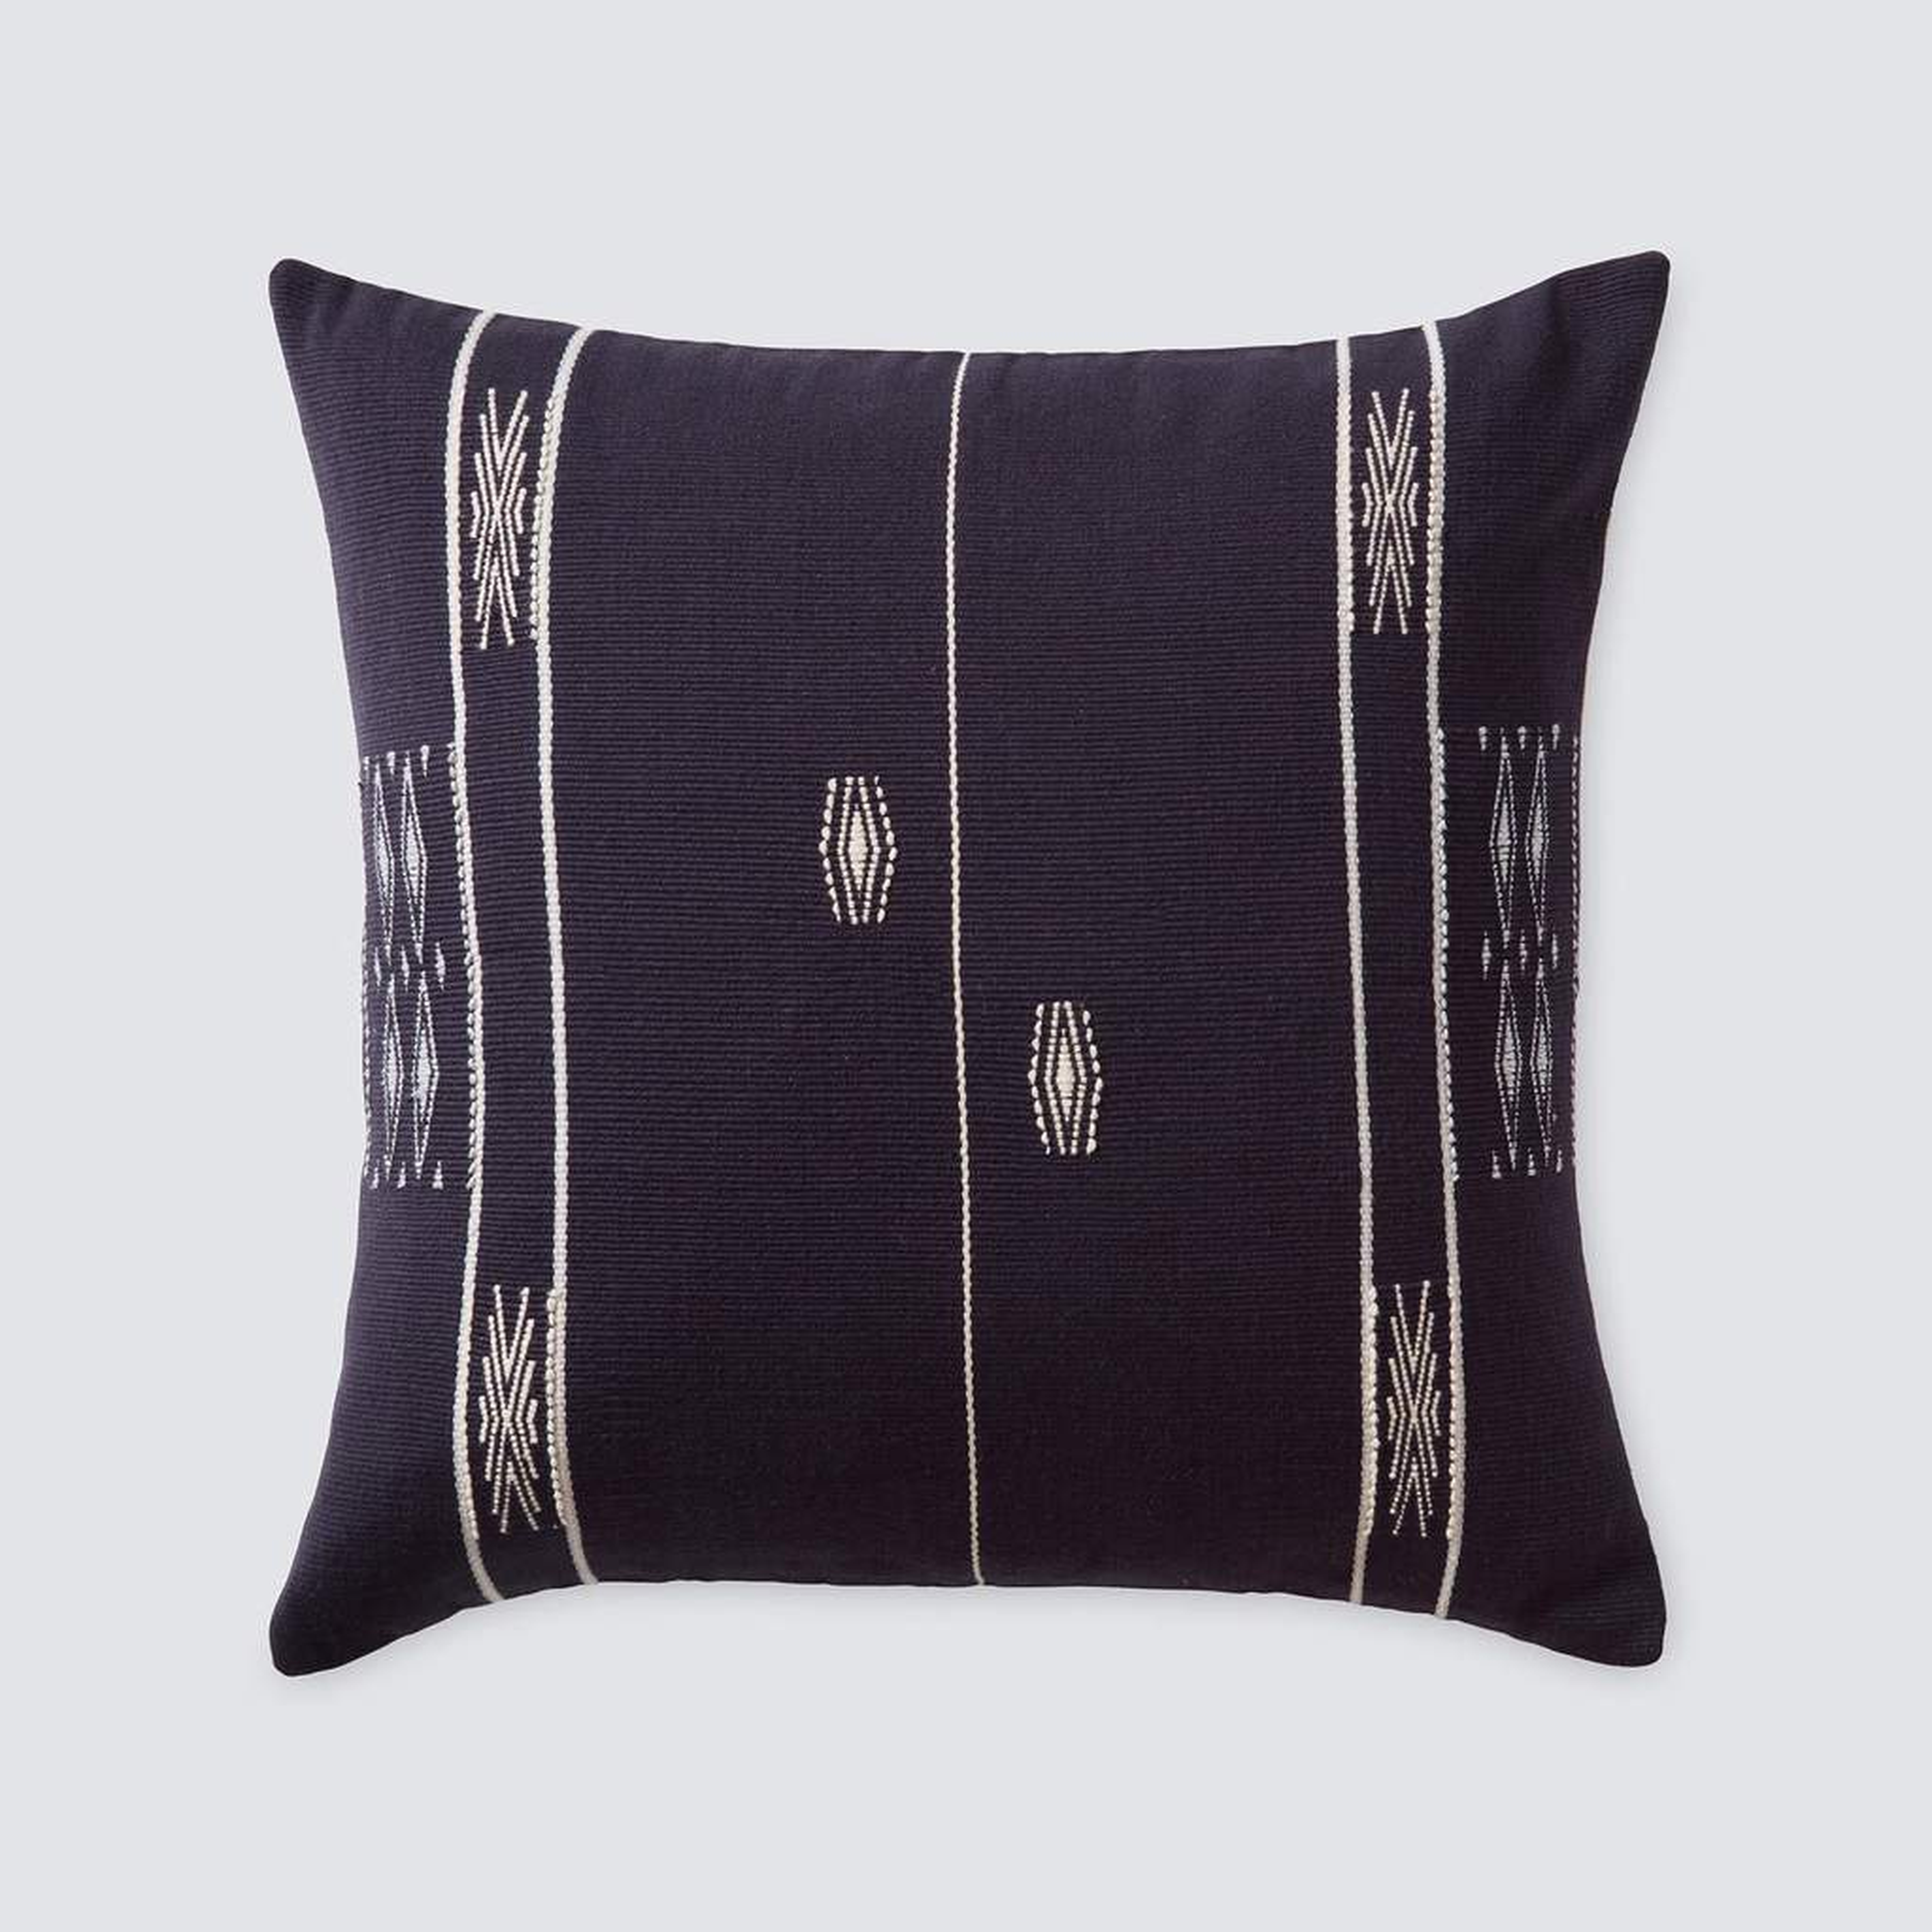 KACHARI PILLOW by The Citizenry - The Citizenry